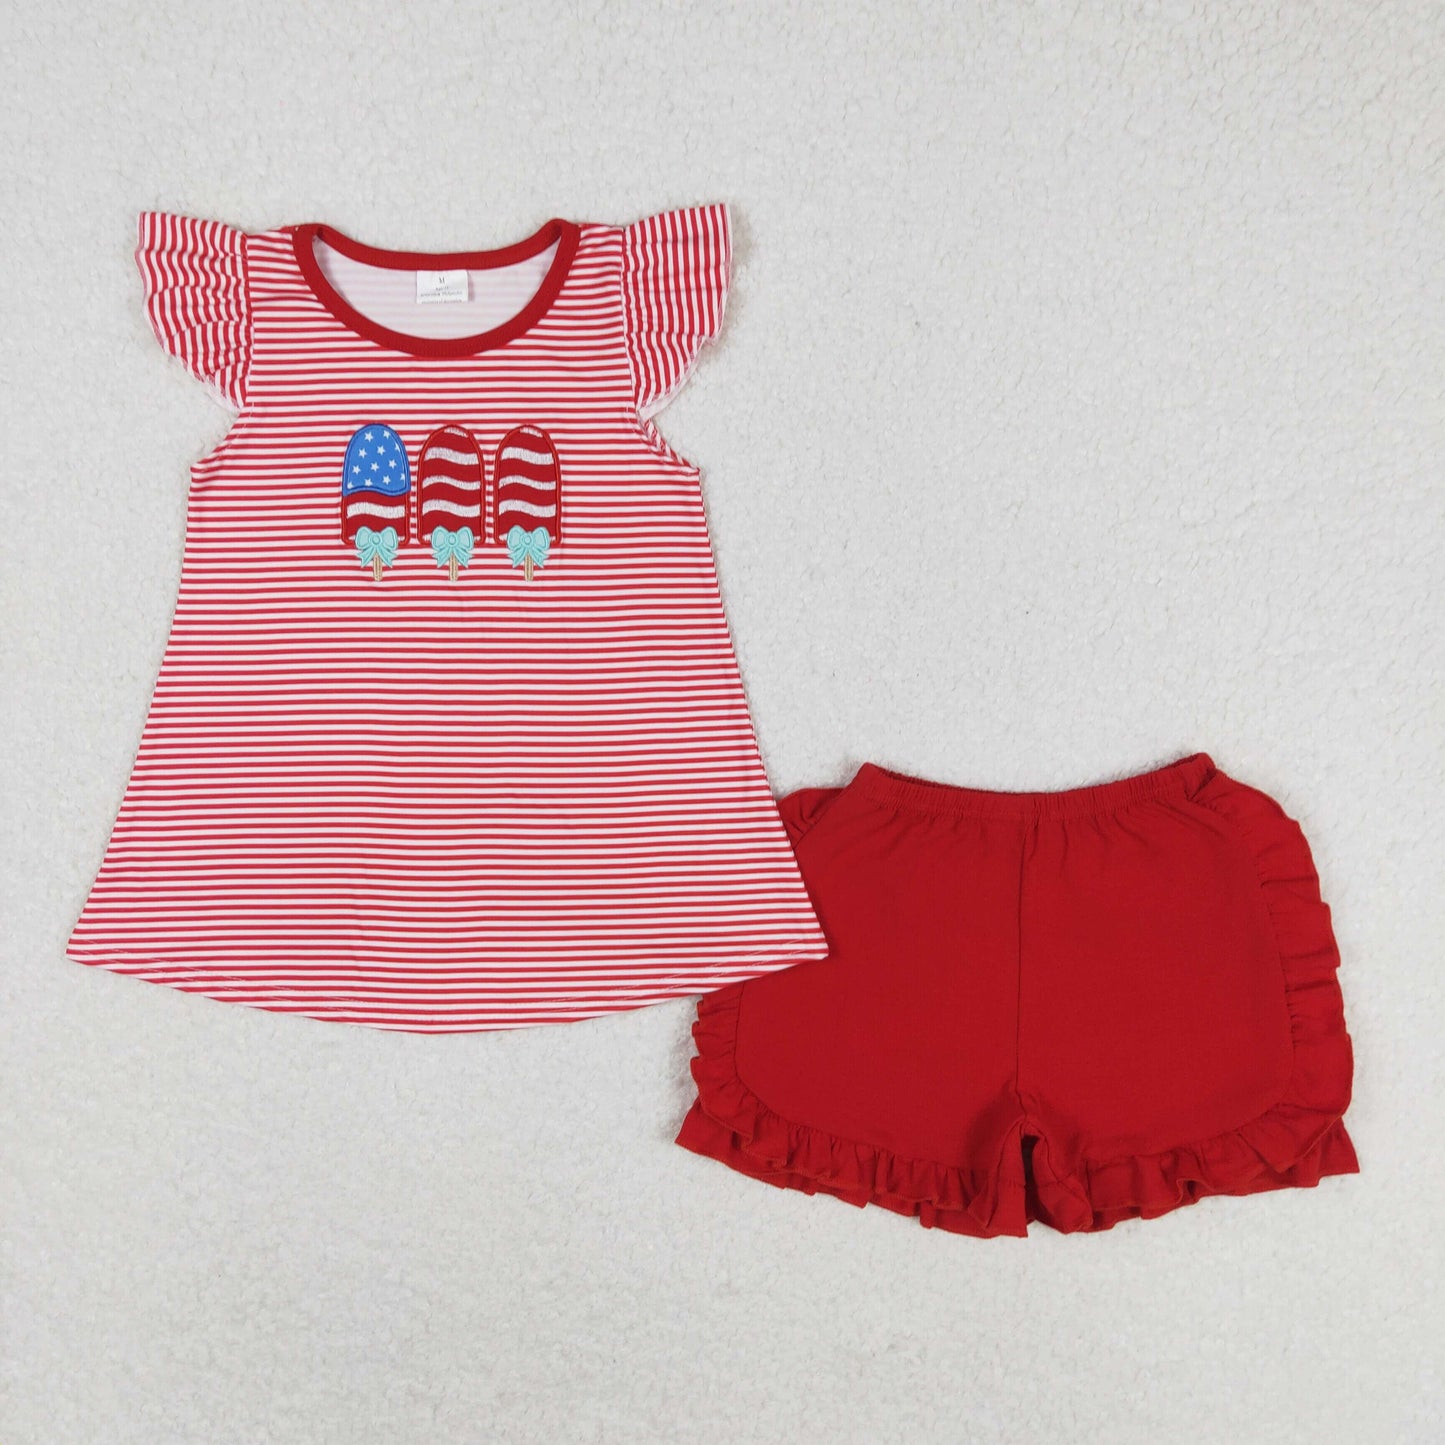 Baby Girls Summer Outfit July 4th Embroidery Popsicle Set